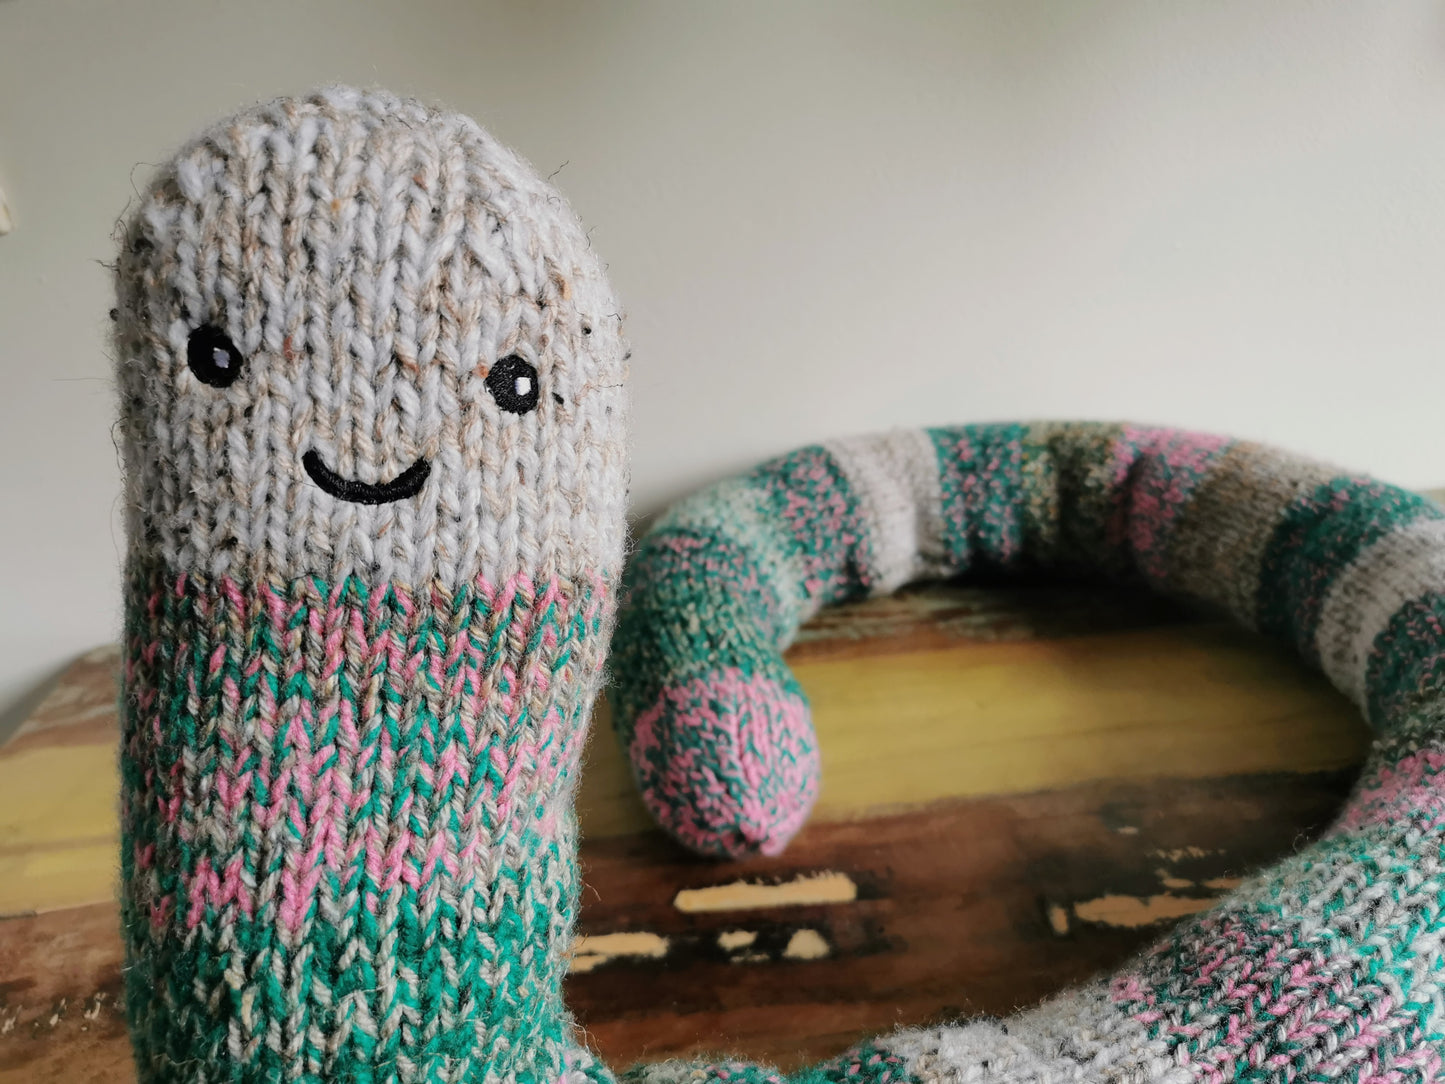 Giant hand knitted worm, chubby fantasy worm, odd giant creature, scrap yarn creature, knitted wool worm, funny odd gift, 165cm